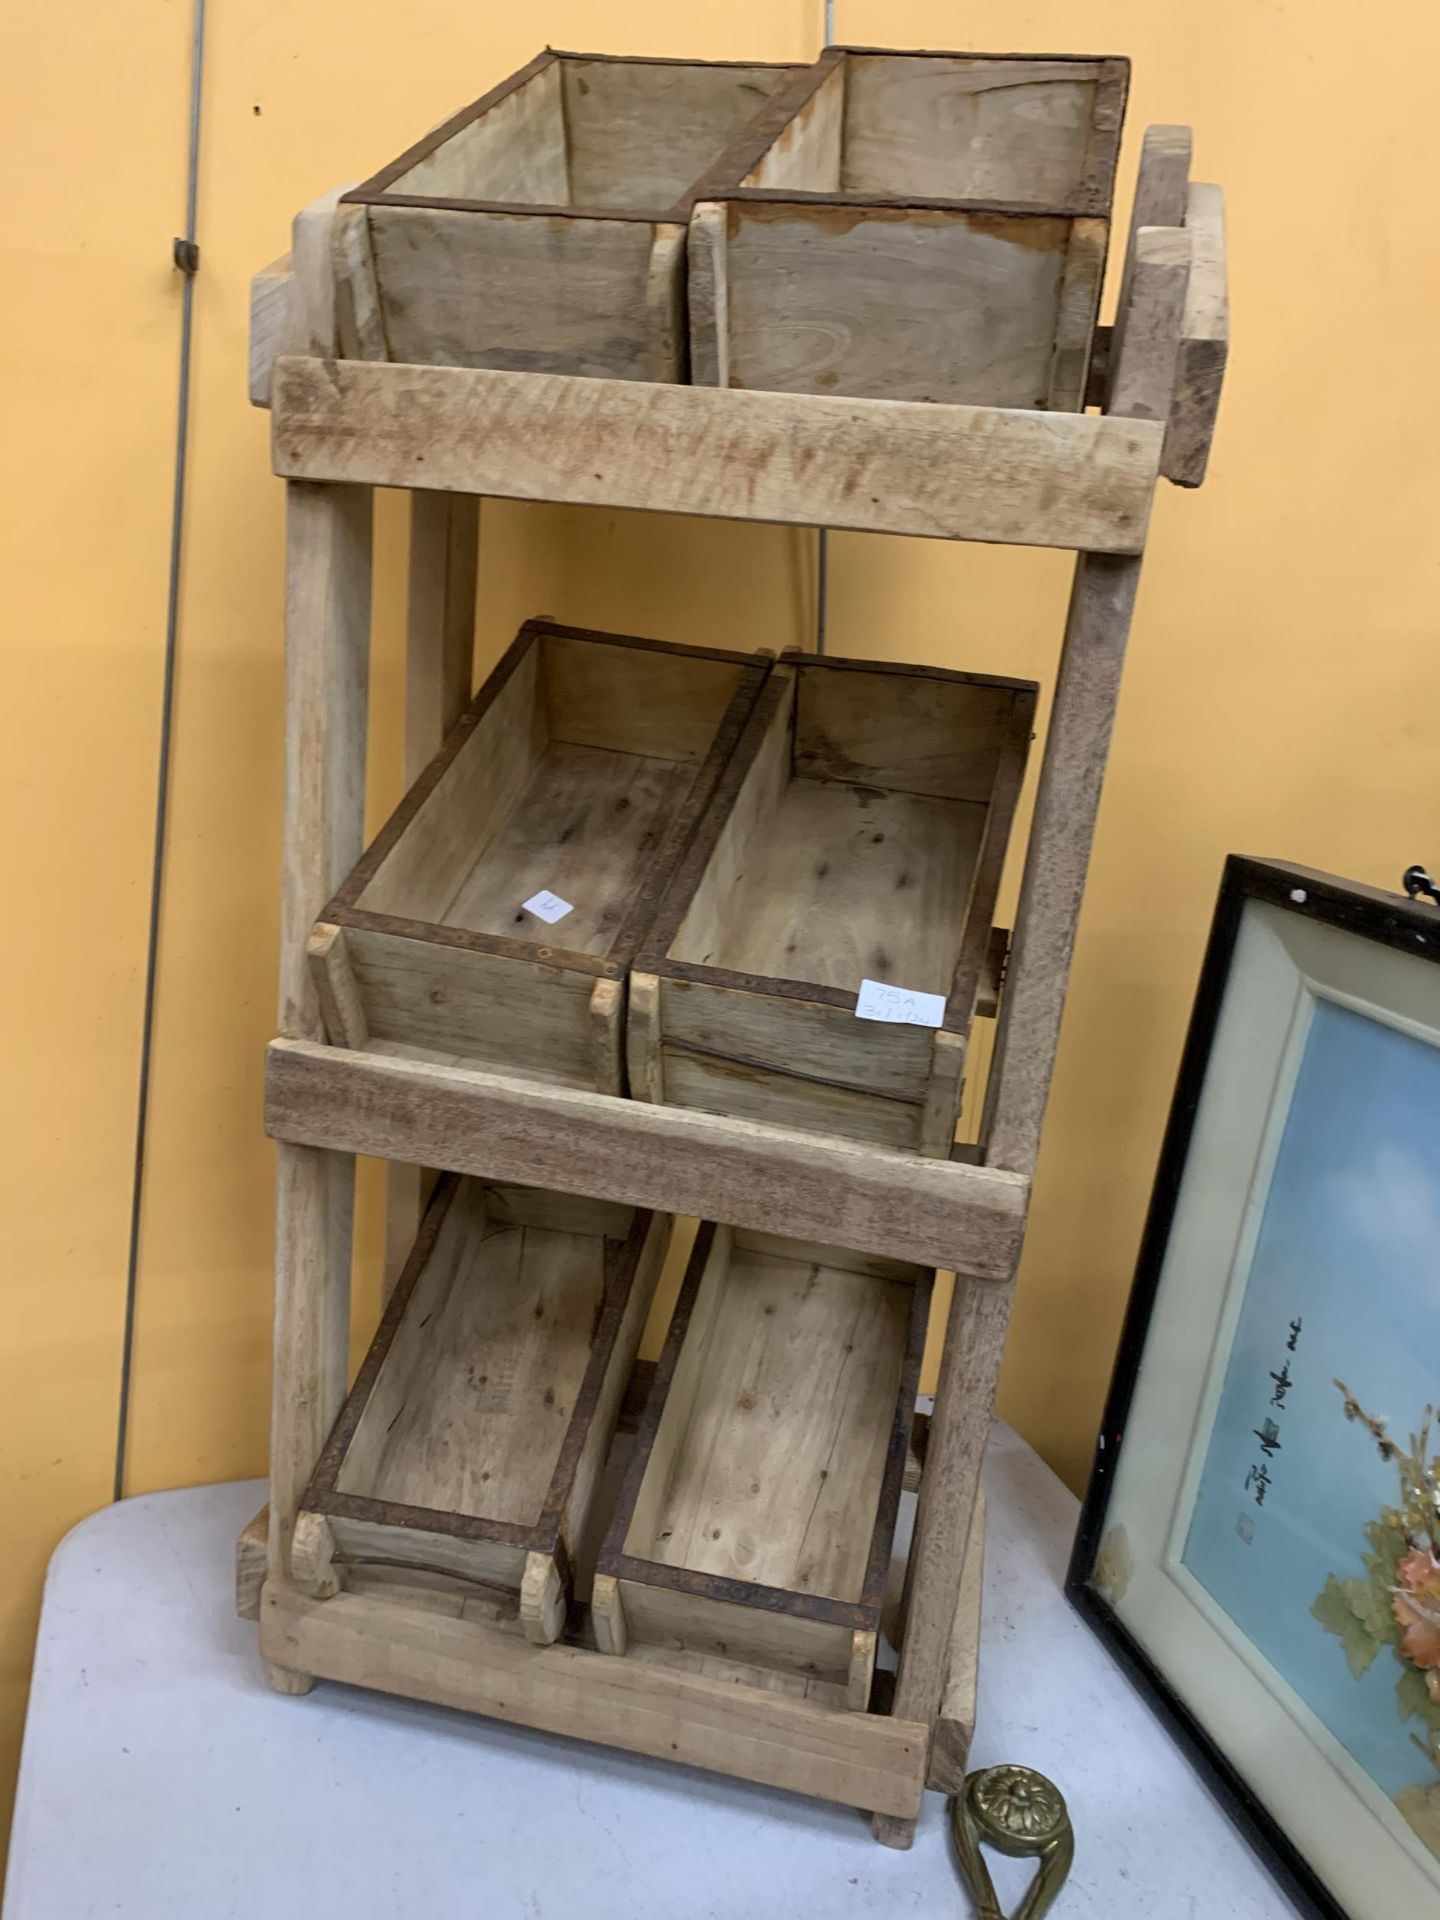 A WOODEN STORAGE RACK WITH SIX BRICK MOULD BOXES - Image 3 of 3